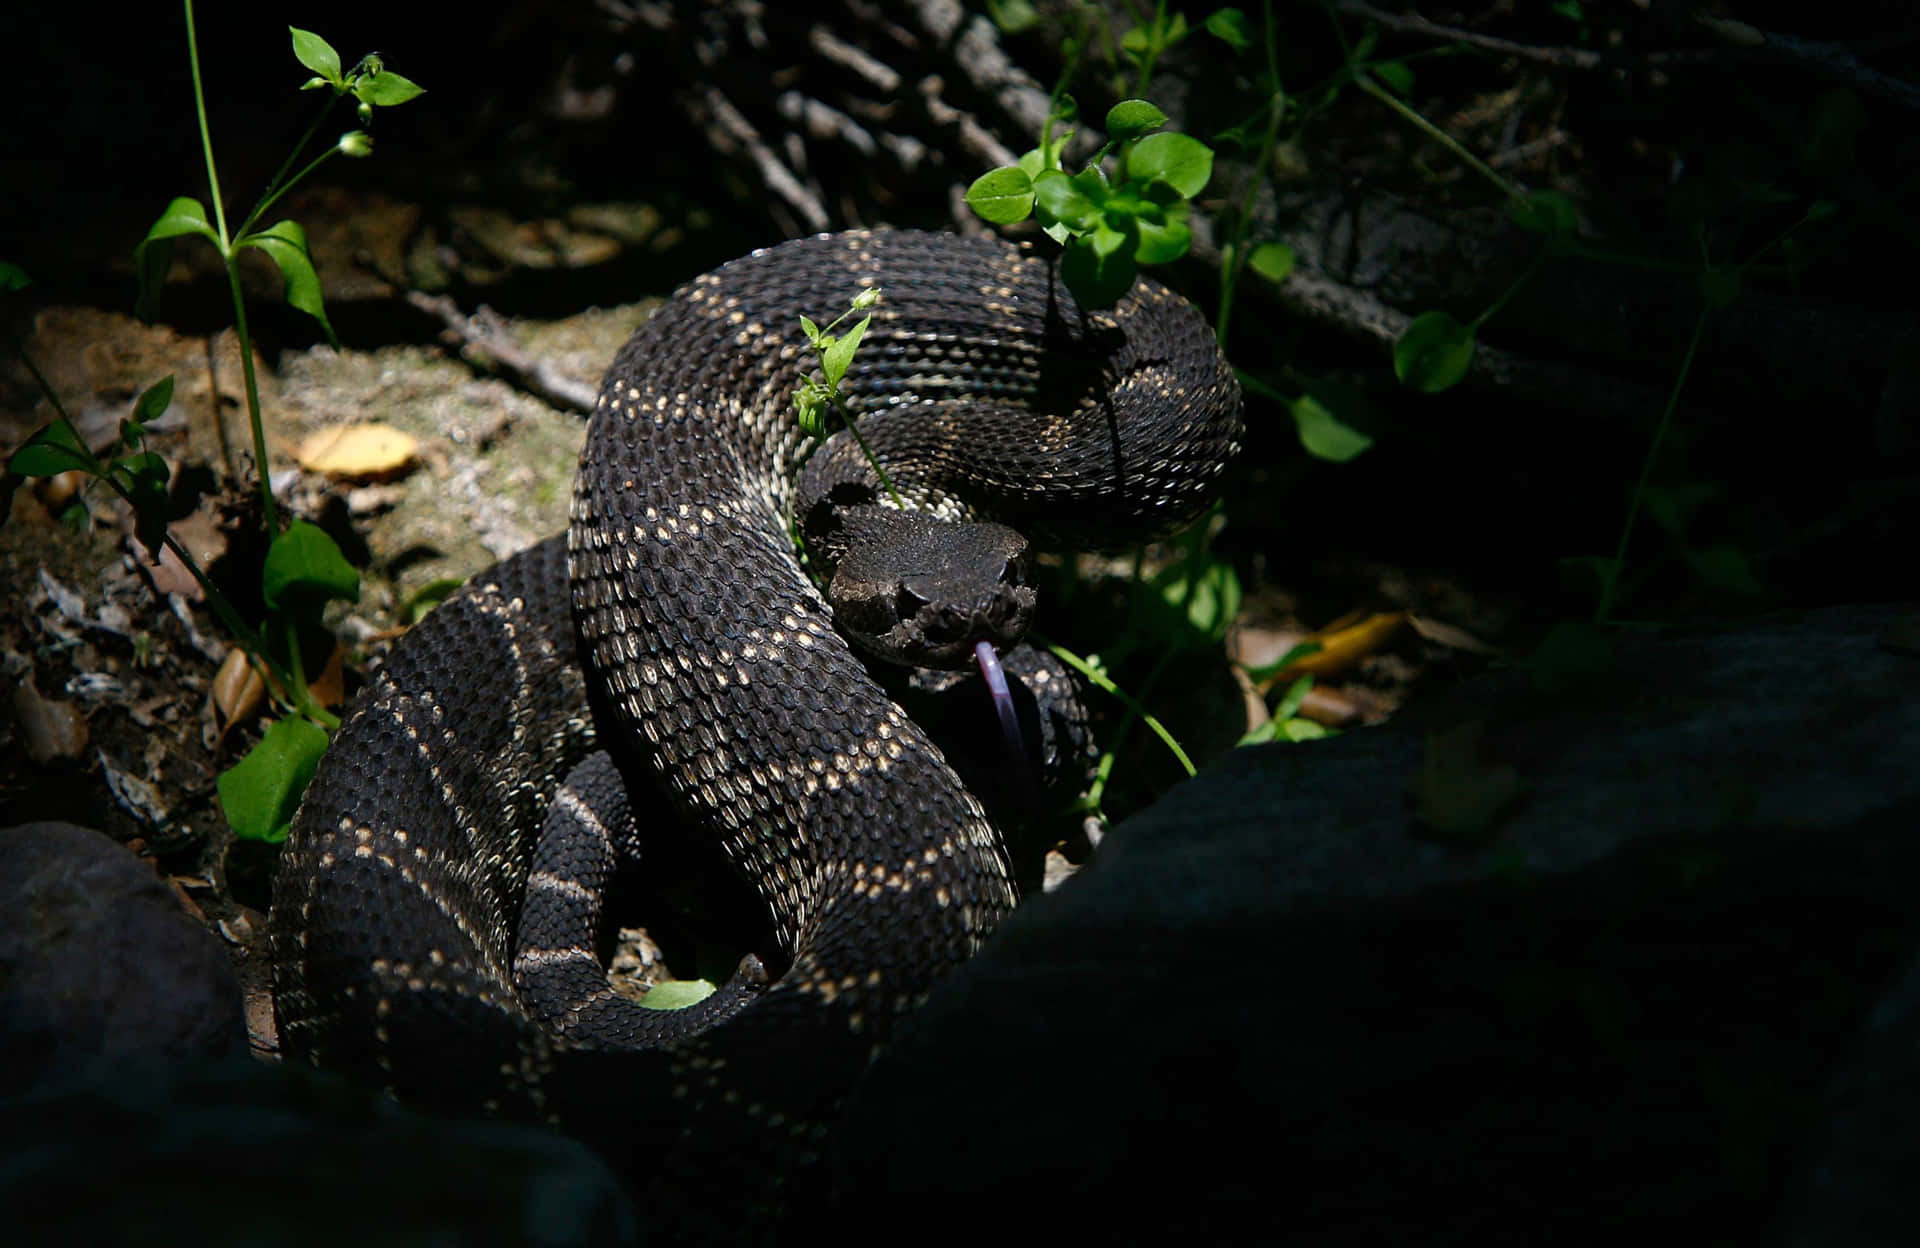 A Black And Brown Rattlesnake Is Sitting On A Rock